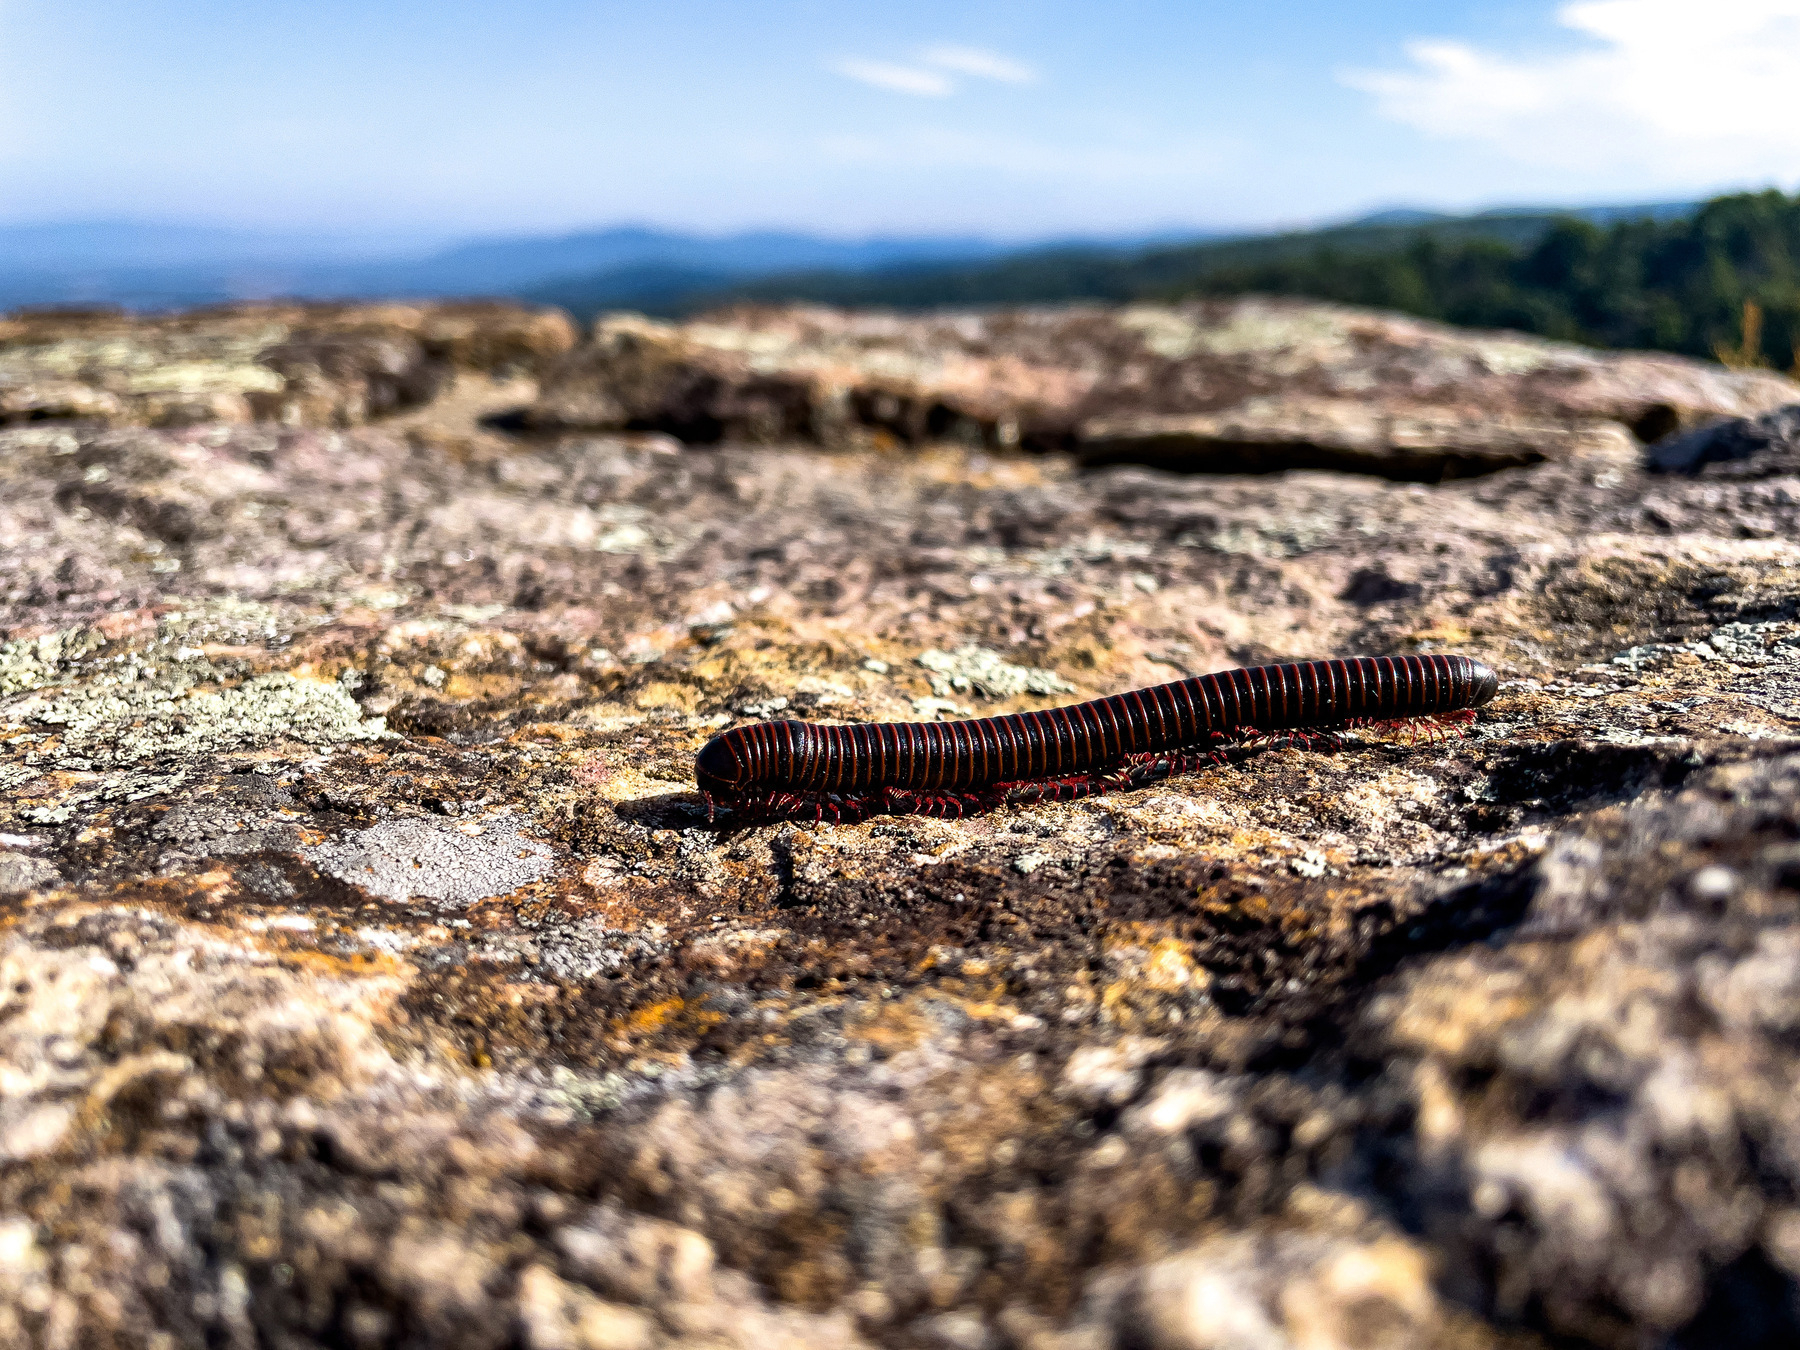 A millipede crawling across the stone wall of an overlook on Skyline Drive in Shenandoah's National Park